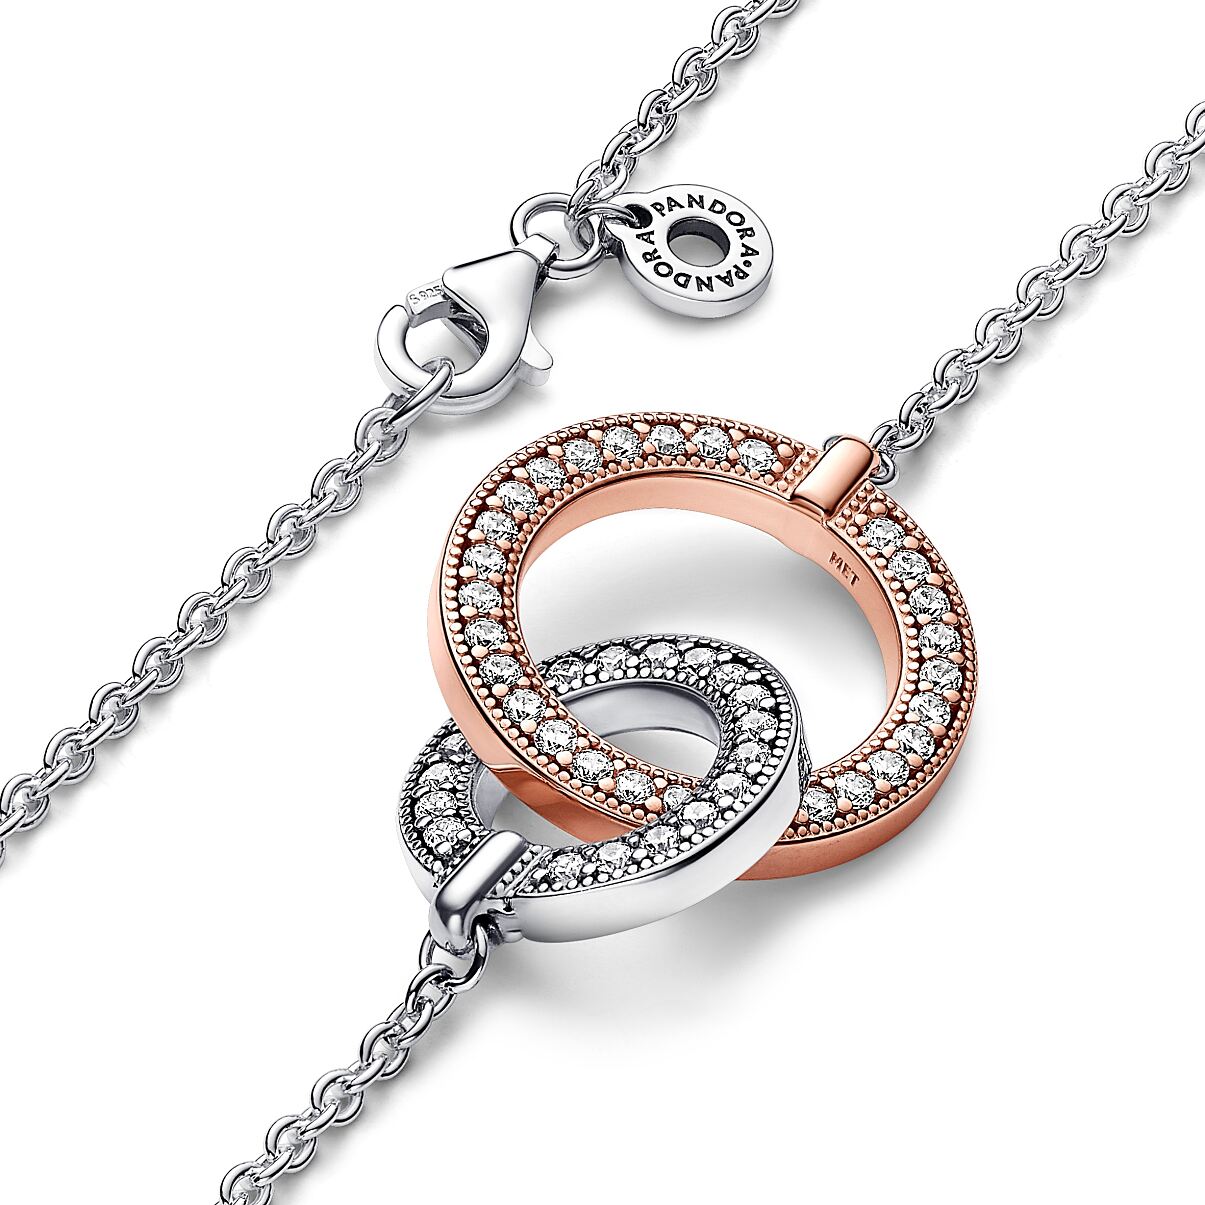 Pandora_Necklace_Sterling Silver_14k Rosé Gold-plated_Cubic Zirconia_382778C01_119,00 Euro (3)